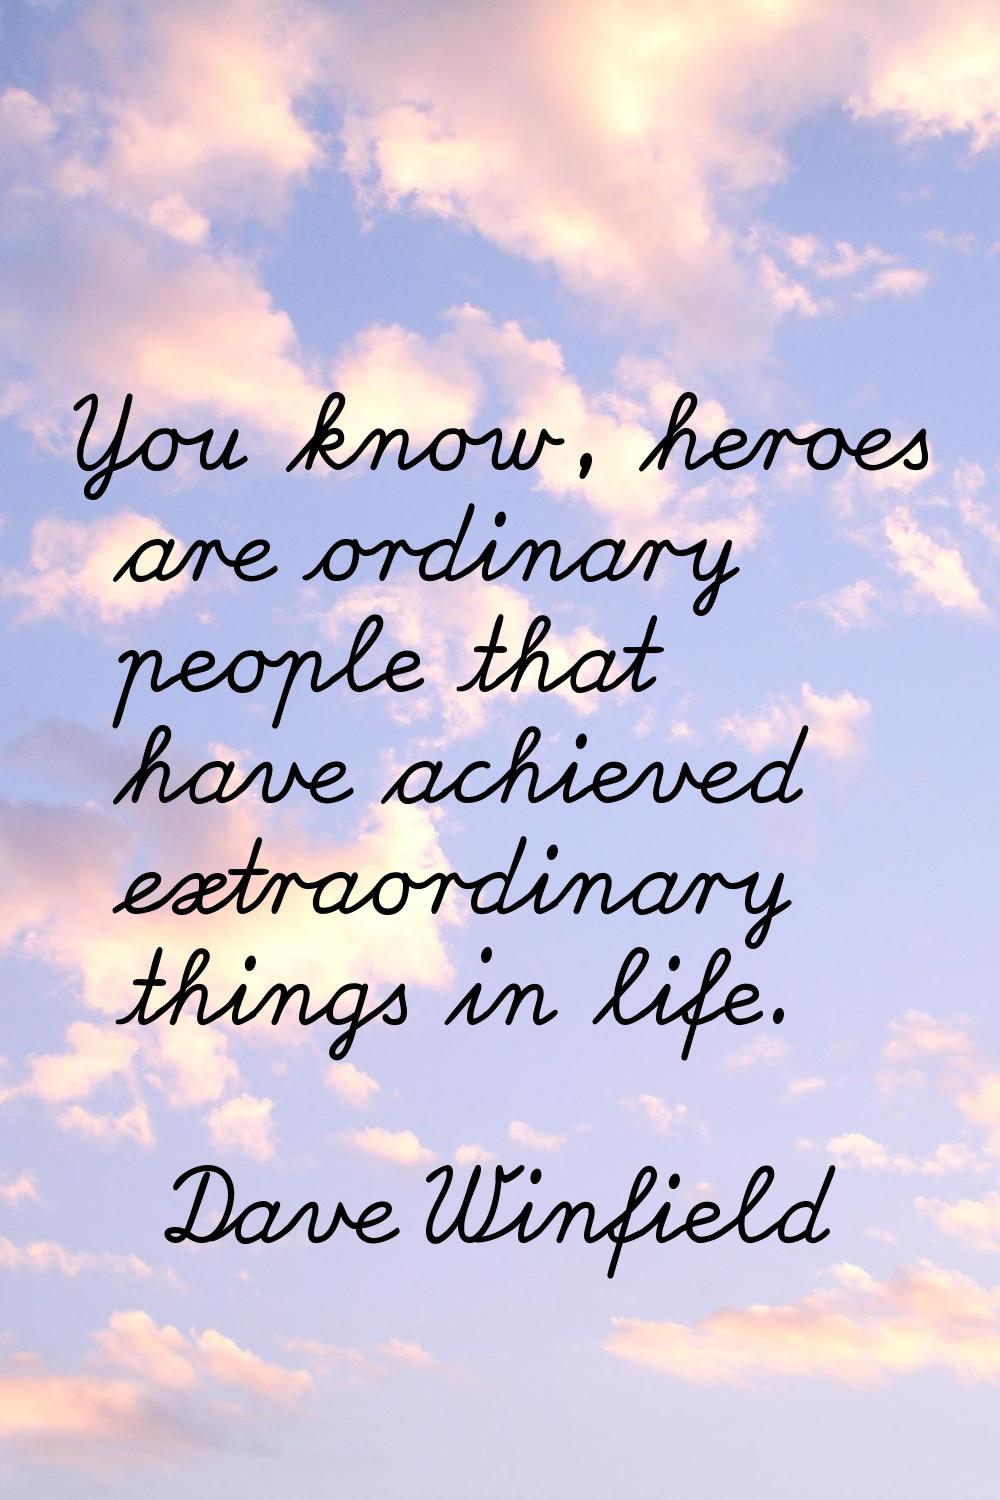 You know, heroes are ordinary people that have achieved extraordinary things in life.